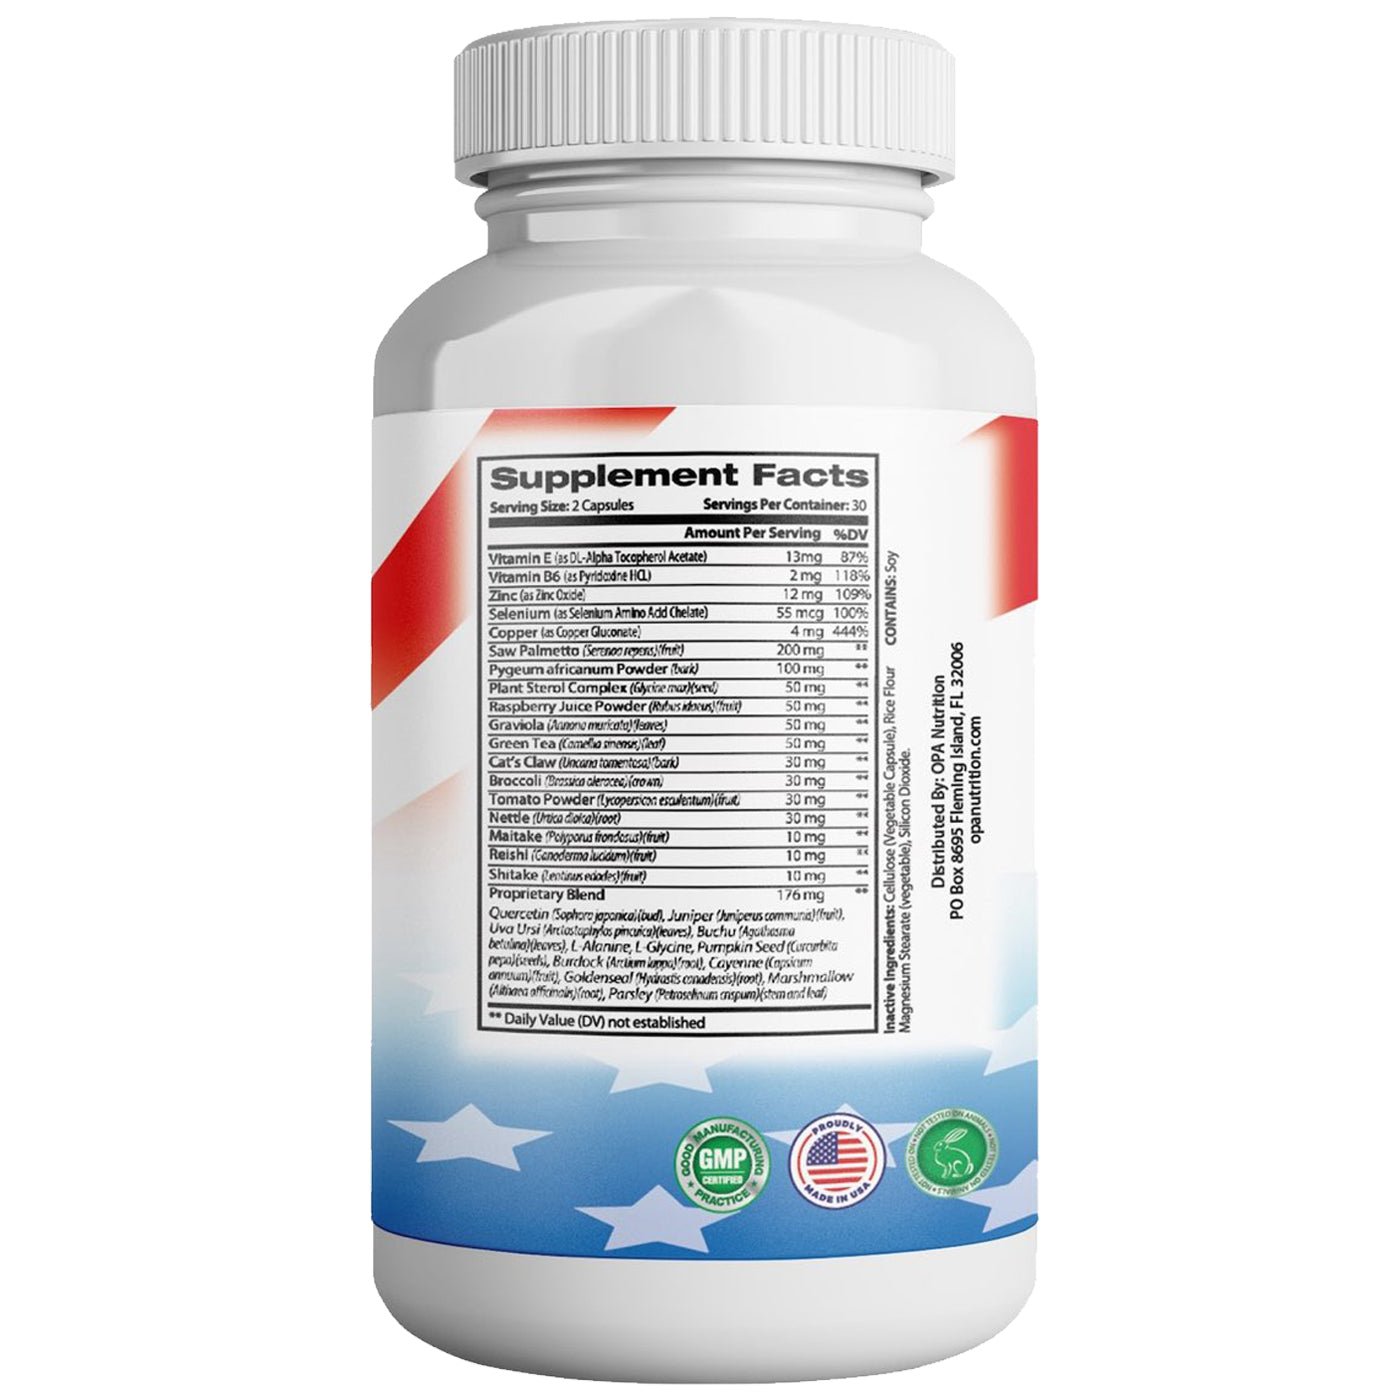 Prostate Supplements with Saw Palmetto and Pumpkin Seed - 60 Ct ingredients.jpg